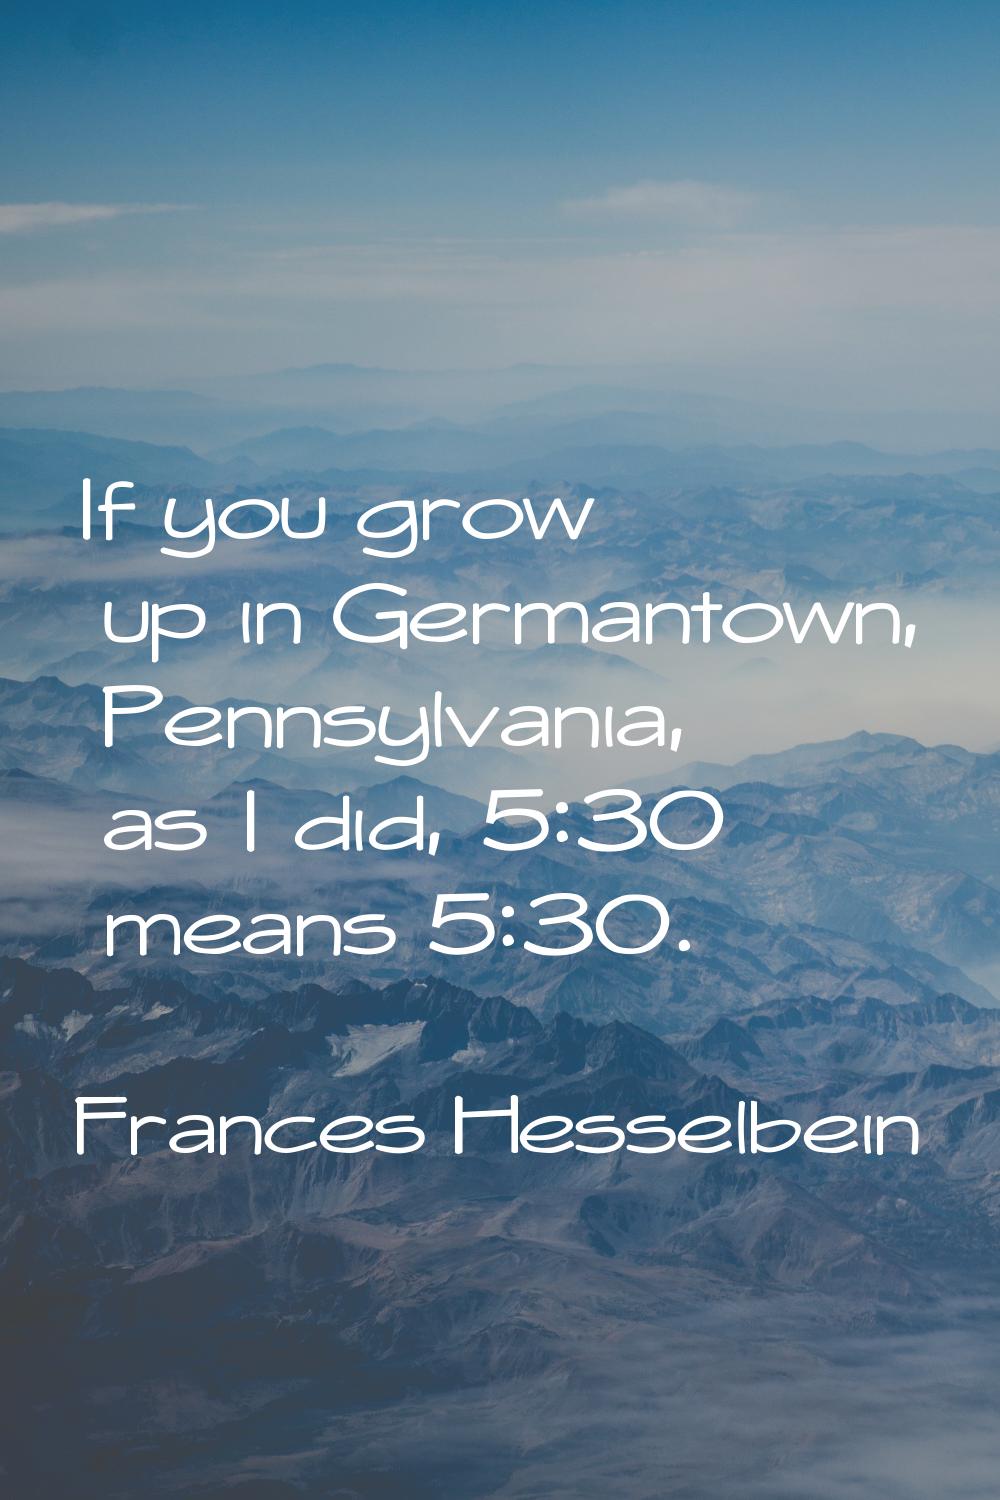 If you grow up in Germantown, Pennsylvania, as I did, 5:30 means 5:30.